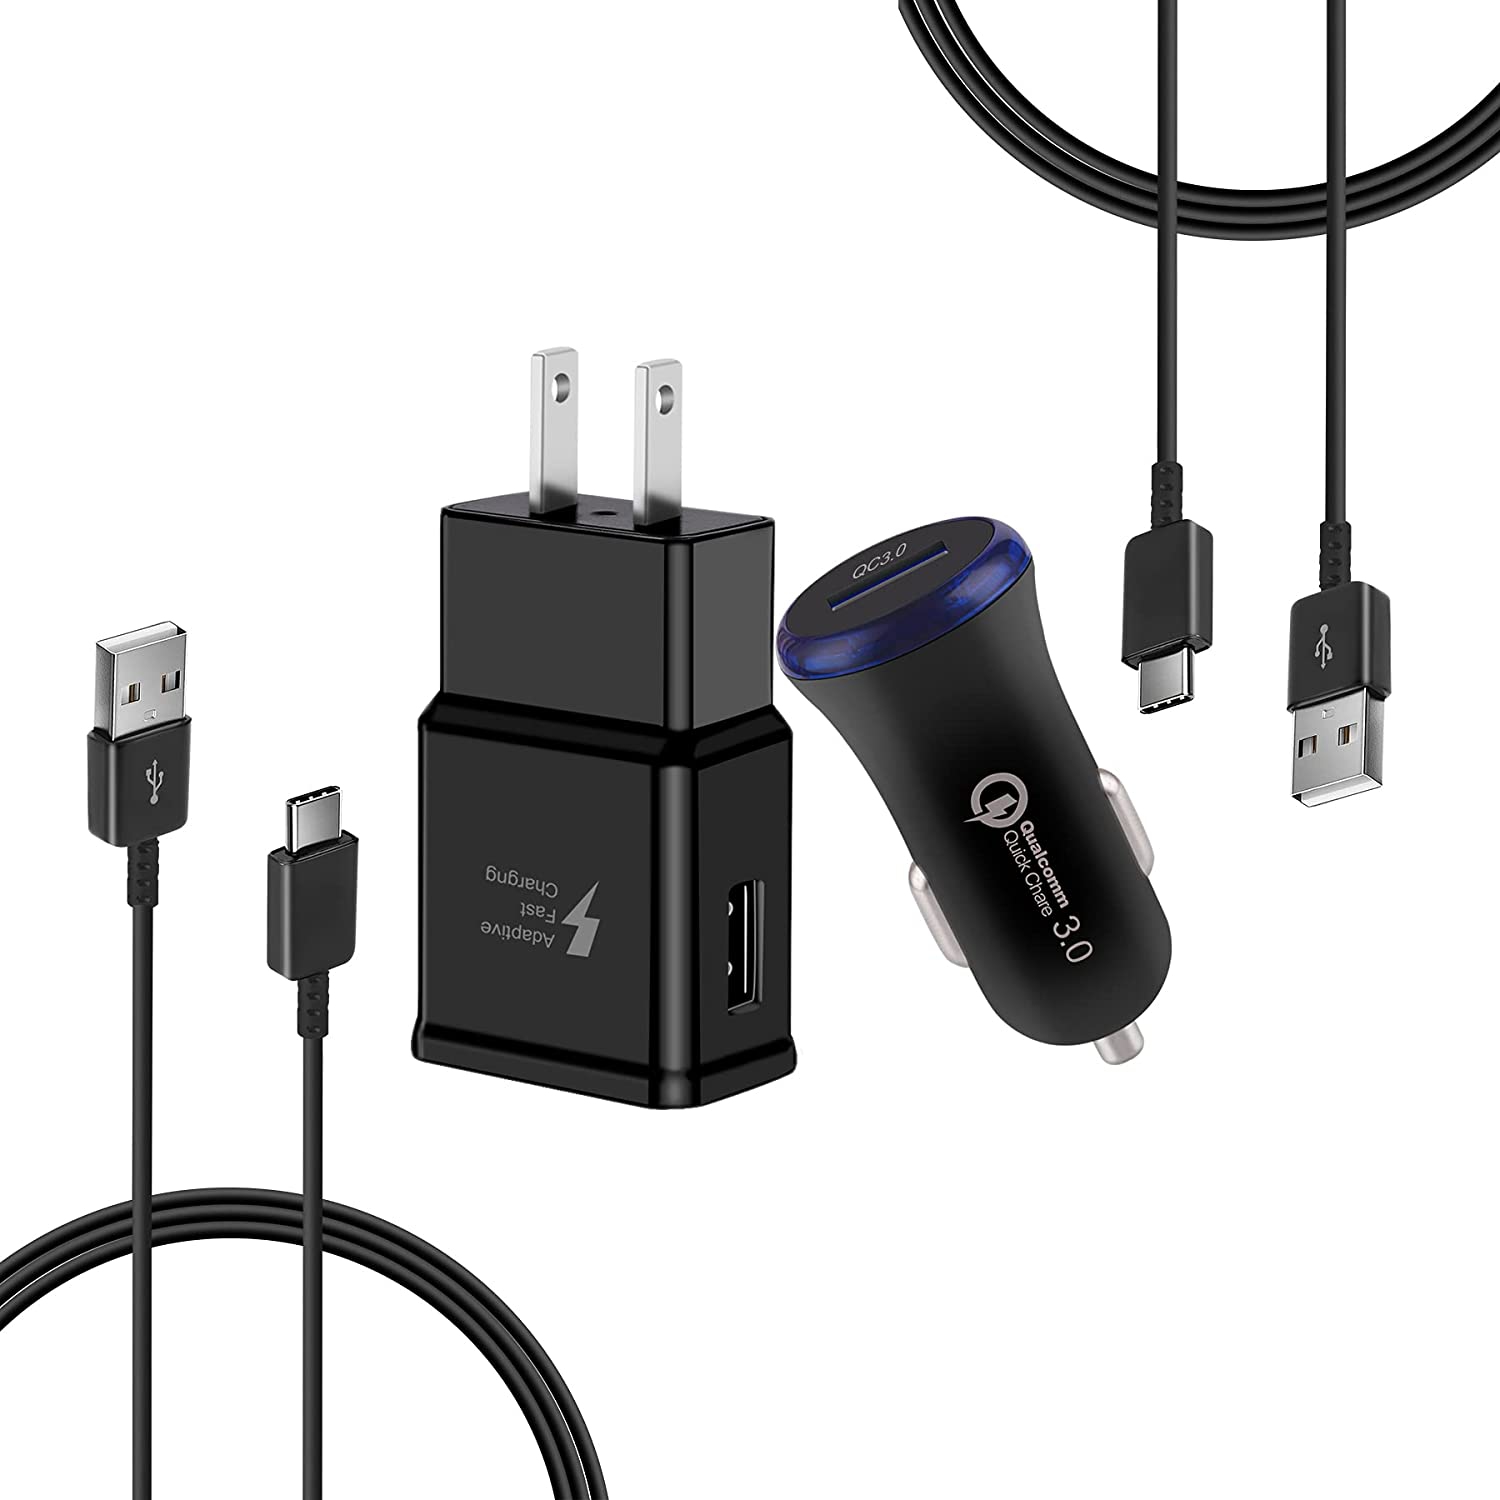 Adaptive Fast Charger Kit Compatible with Samsung Galaxy S21/S20/Plus/Ultra/S10/S10E/S9/S8/Note 20/10/9/8/A20, Quick Charge 3.0 Charger kit, Wall Charger + Car Charger + 2 x Type C